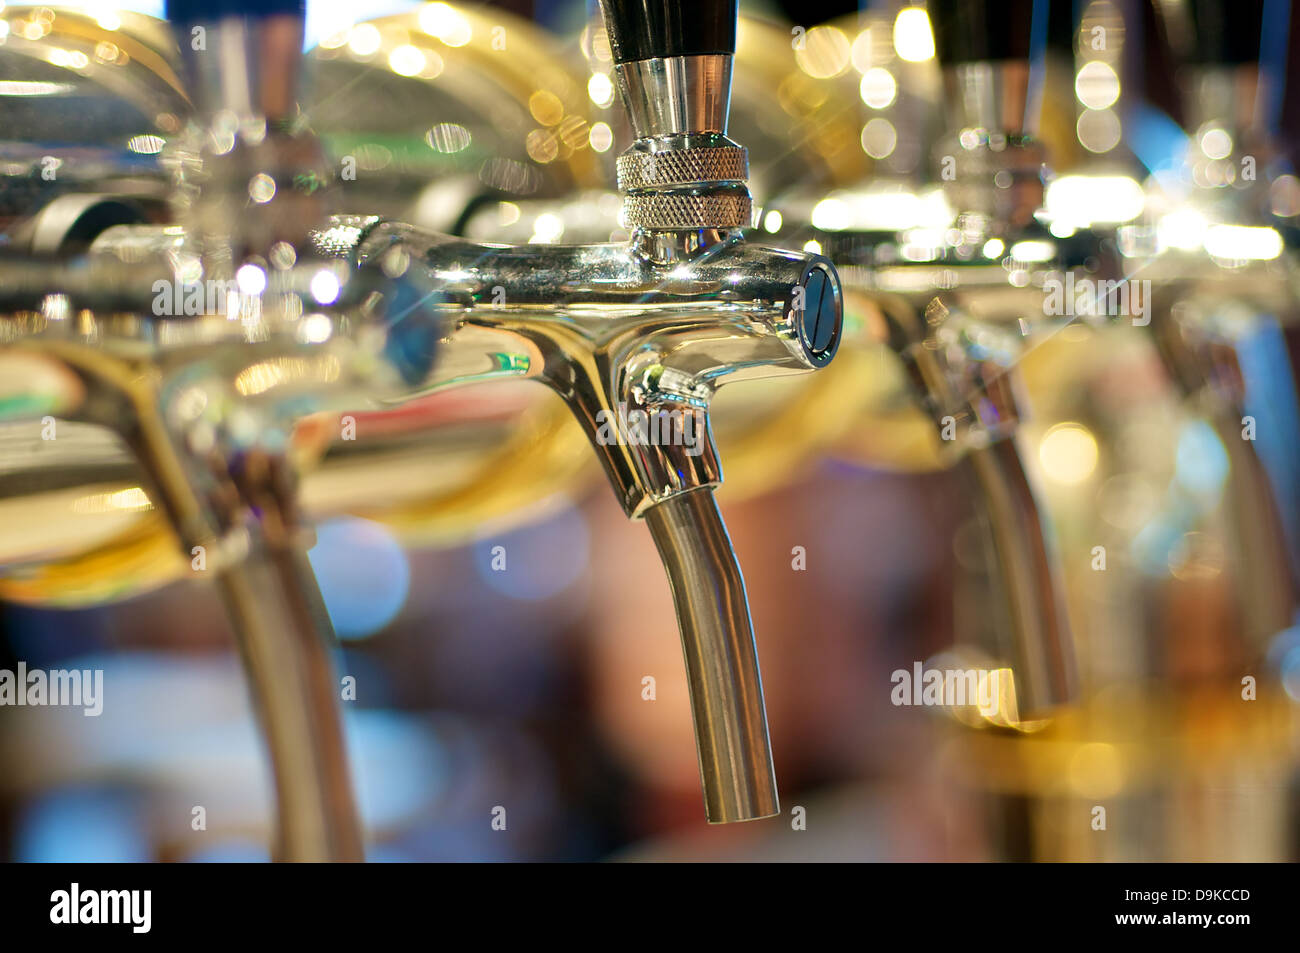 Beer taps in a row Stock Photo